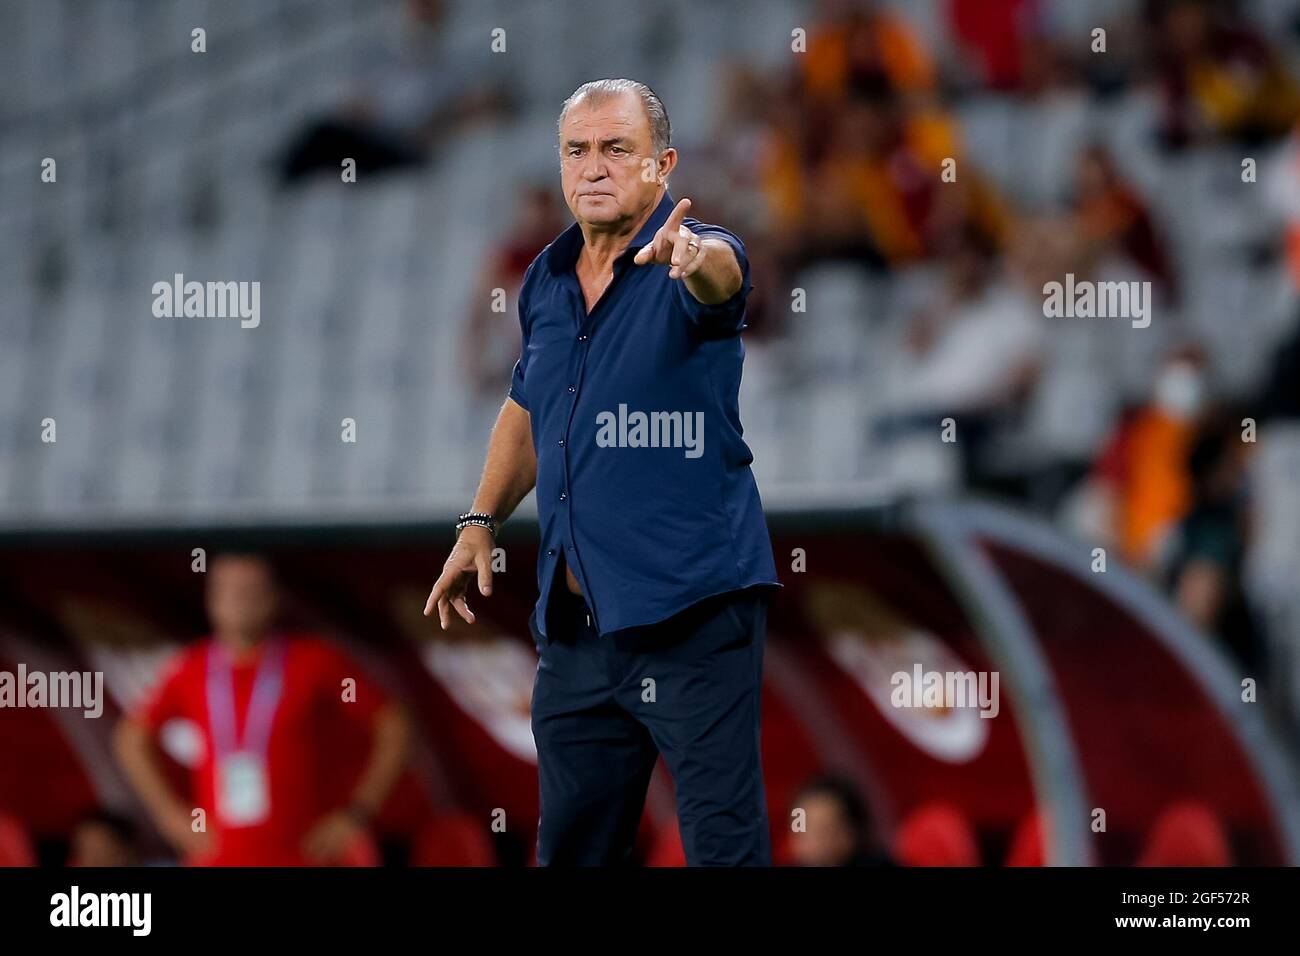 ISTANBUL, TURKEY - AUGUST 23: Coach Fatih Terim of Galatasaray during the  Super Lig match between Galatasaray